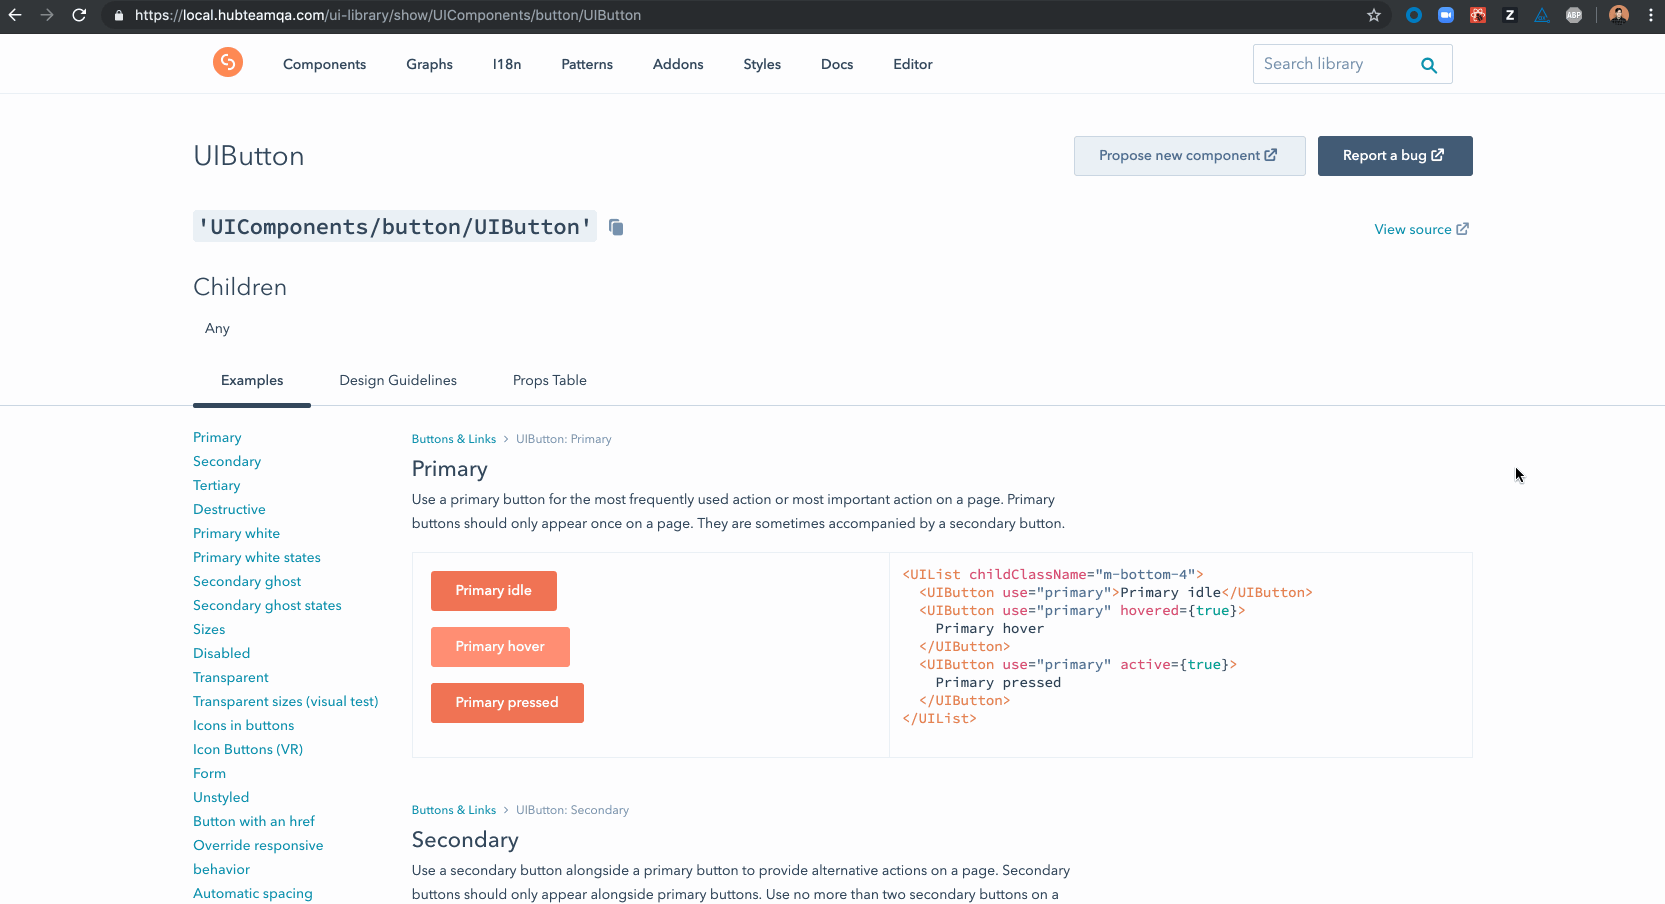 The redesigned UI Library, featuring a tabbed layout that makes it easier to navigate and find content for each specific component.